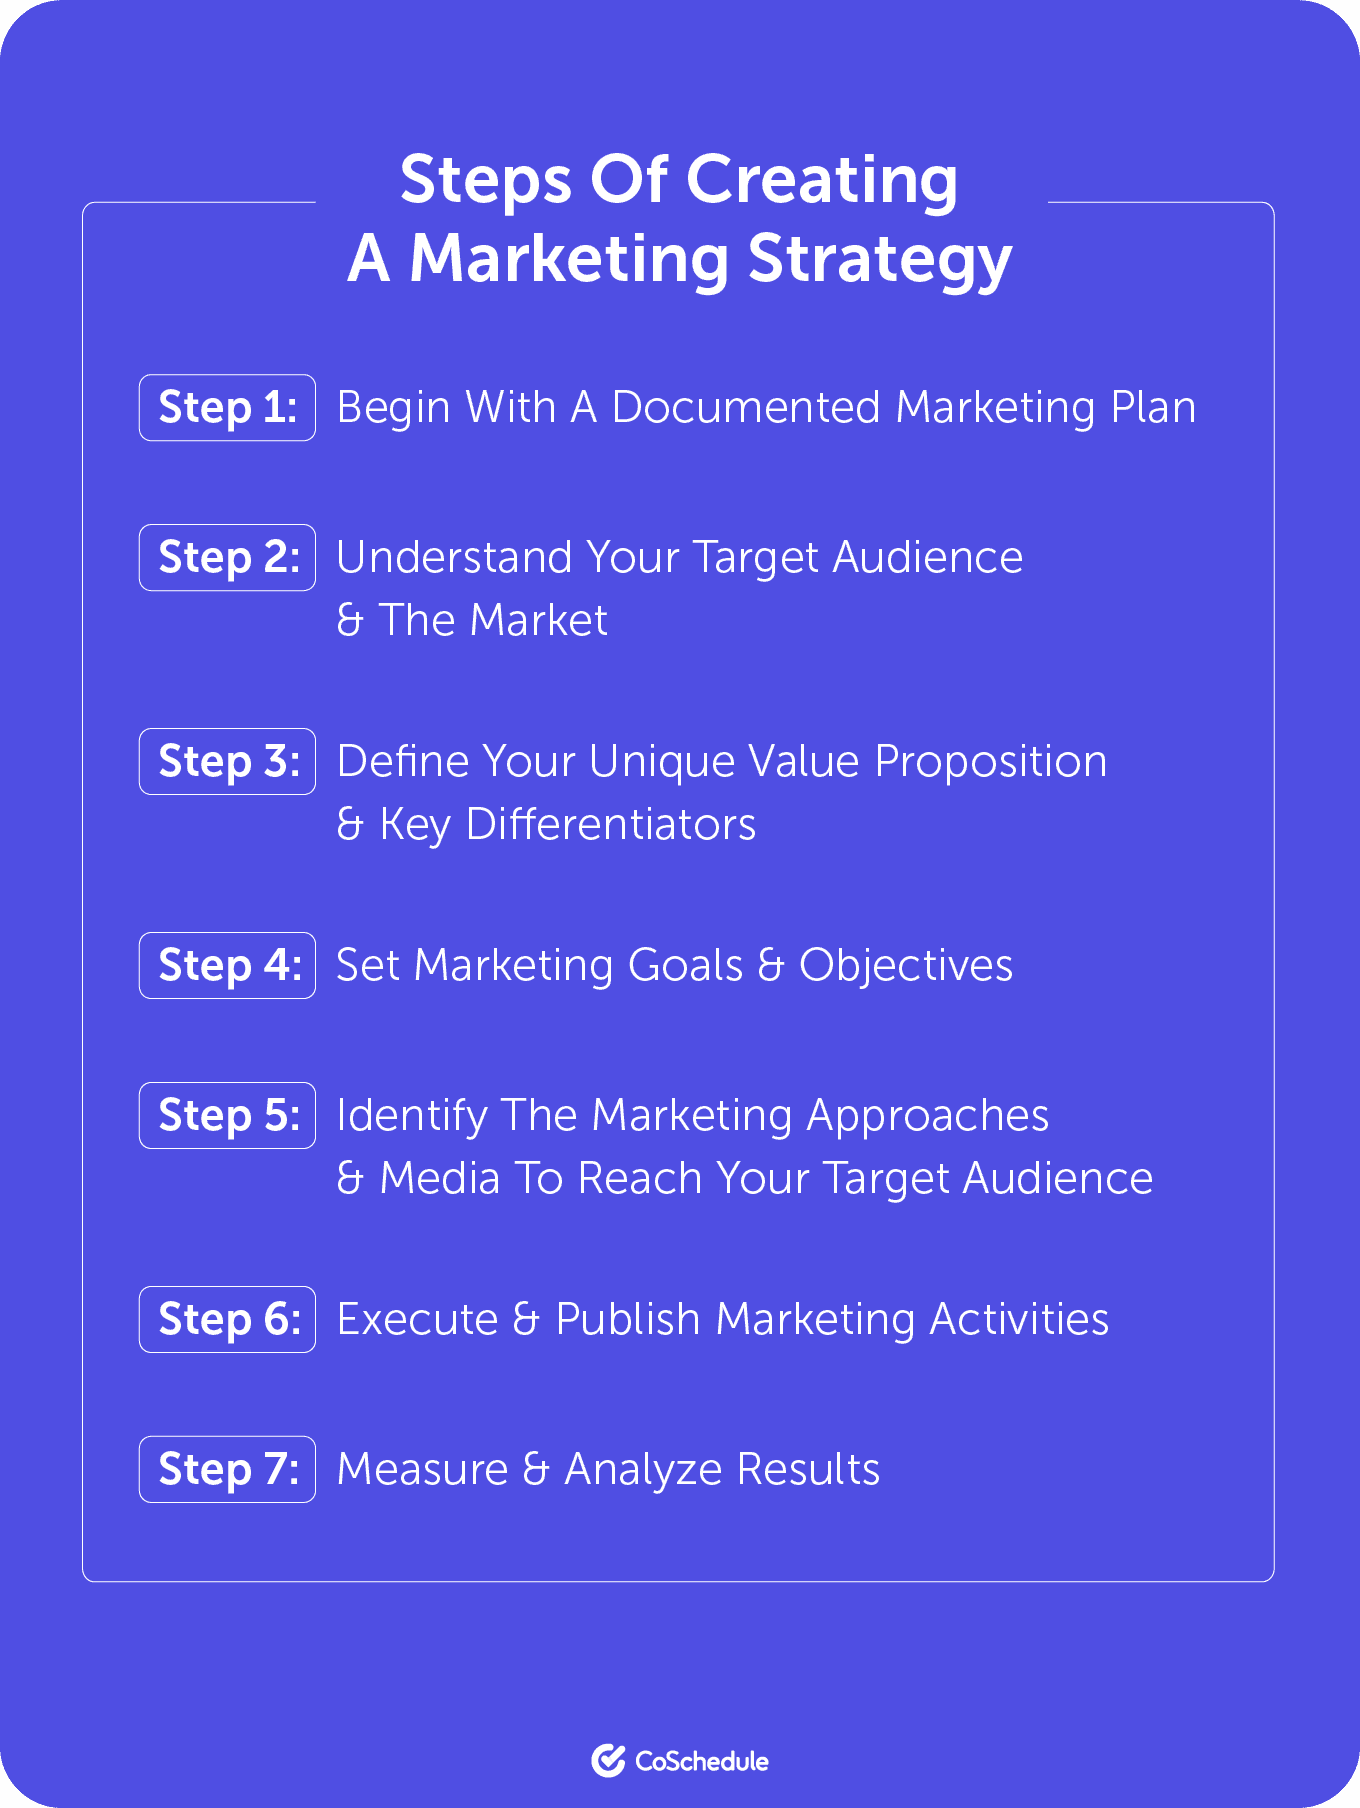 Basic steps to create a successful marketing strategy